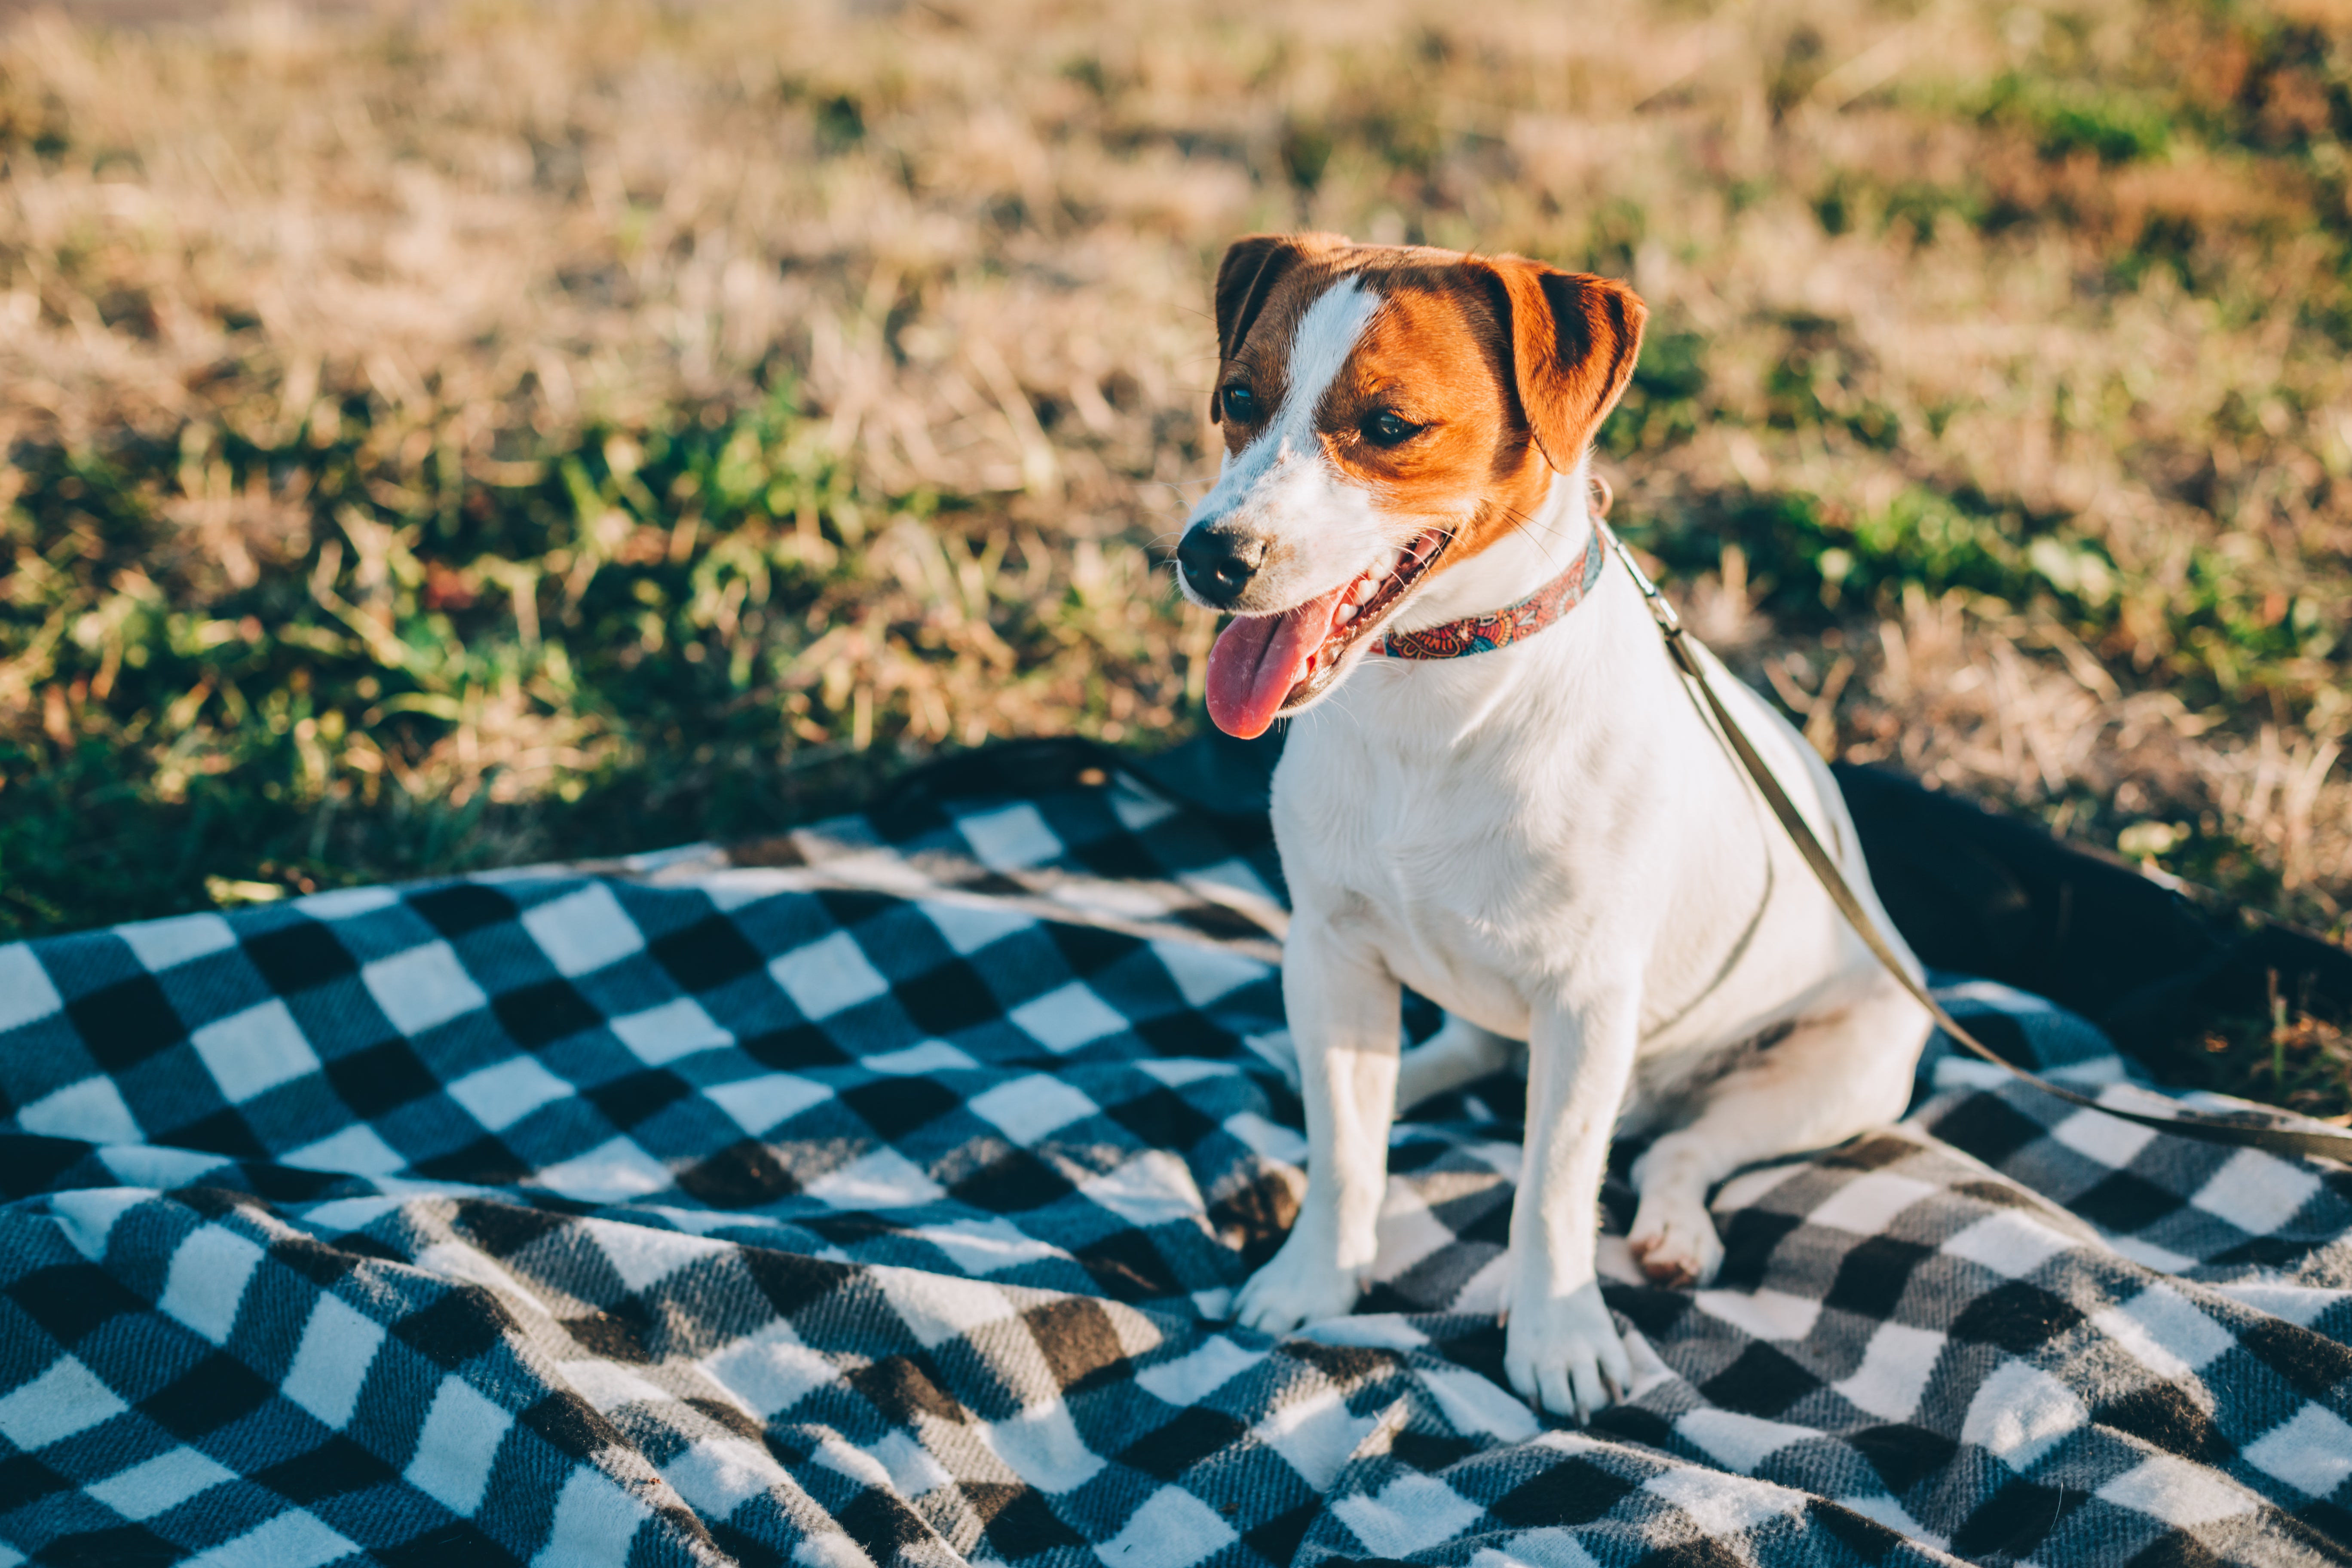 5 Top Tips to Keep Your Dog Safe at Summer Gatherings